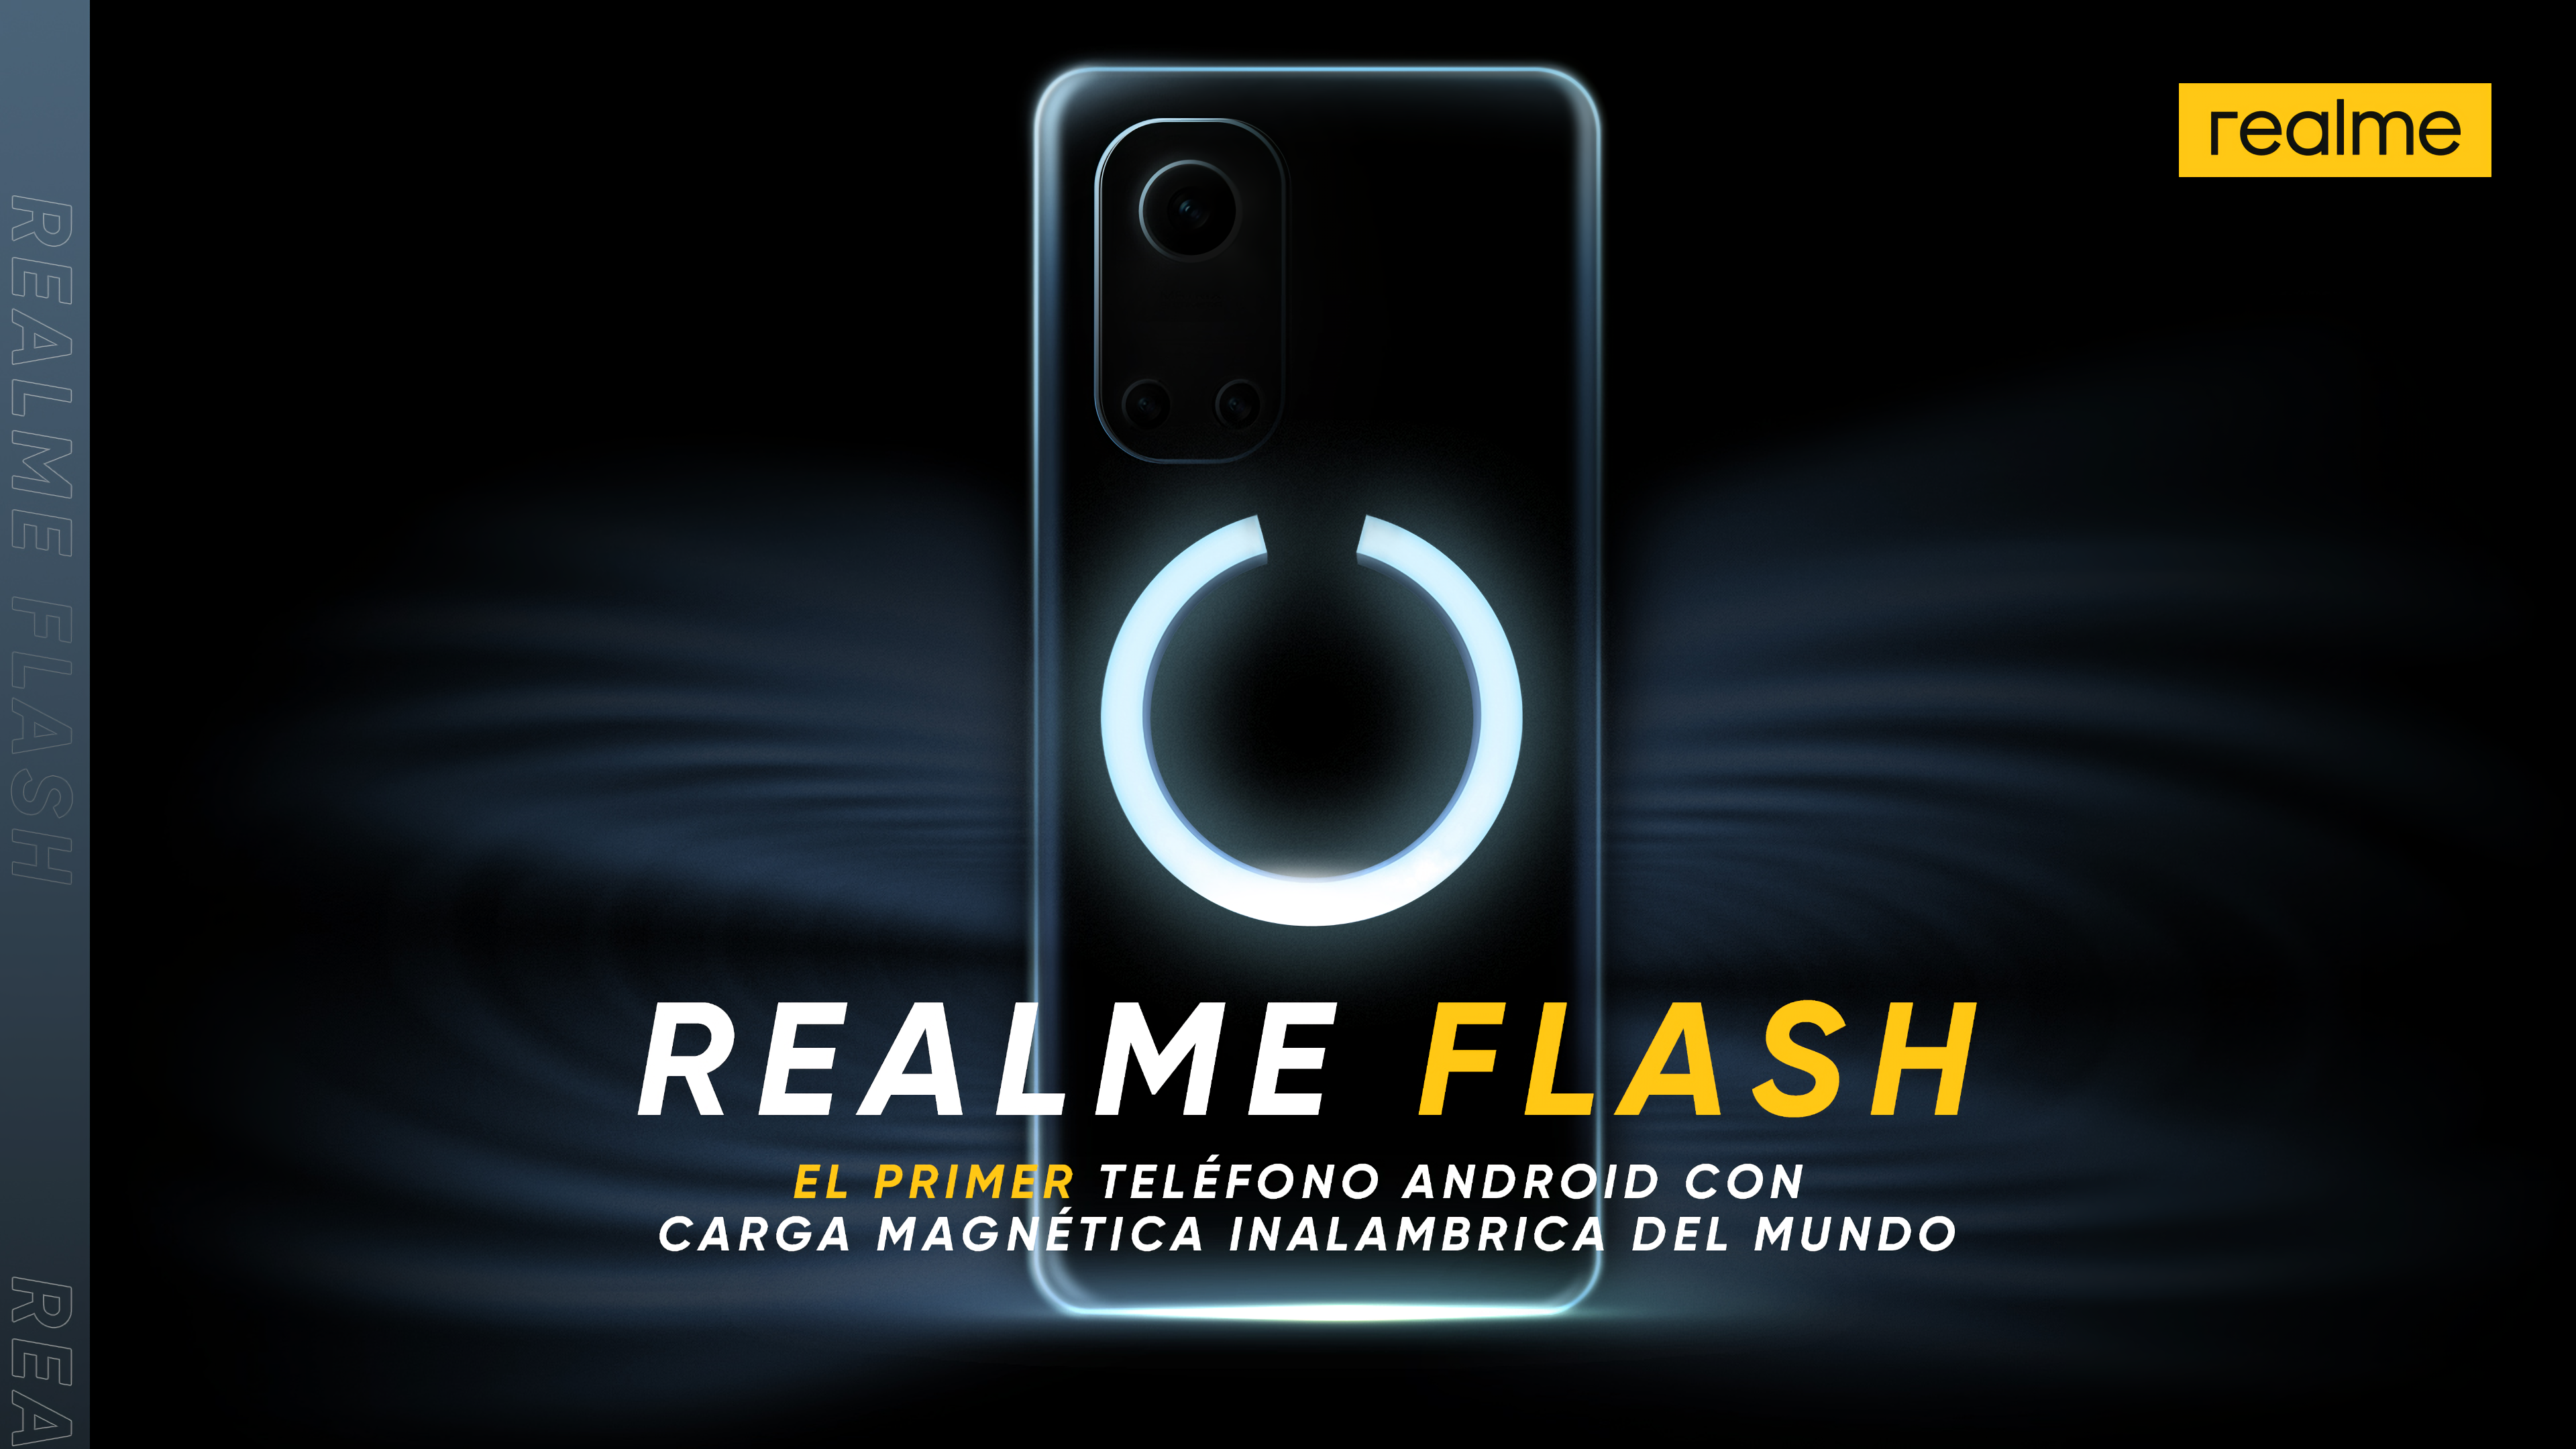 Realme confirms that its Flash device is launching on 3rd August